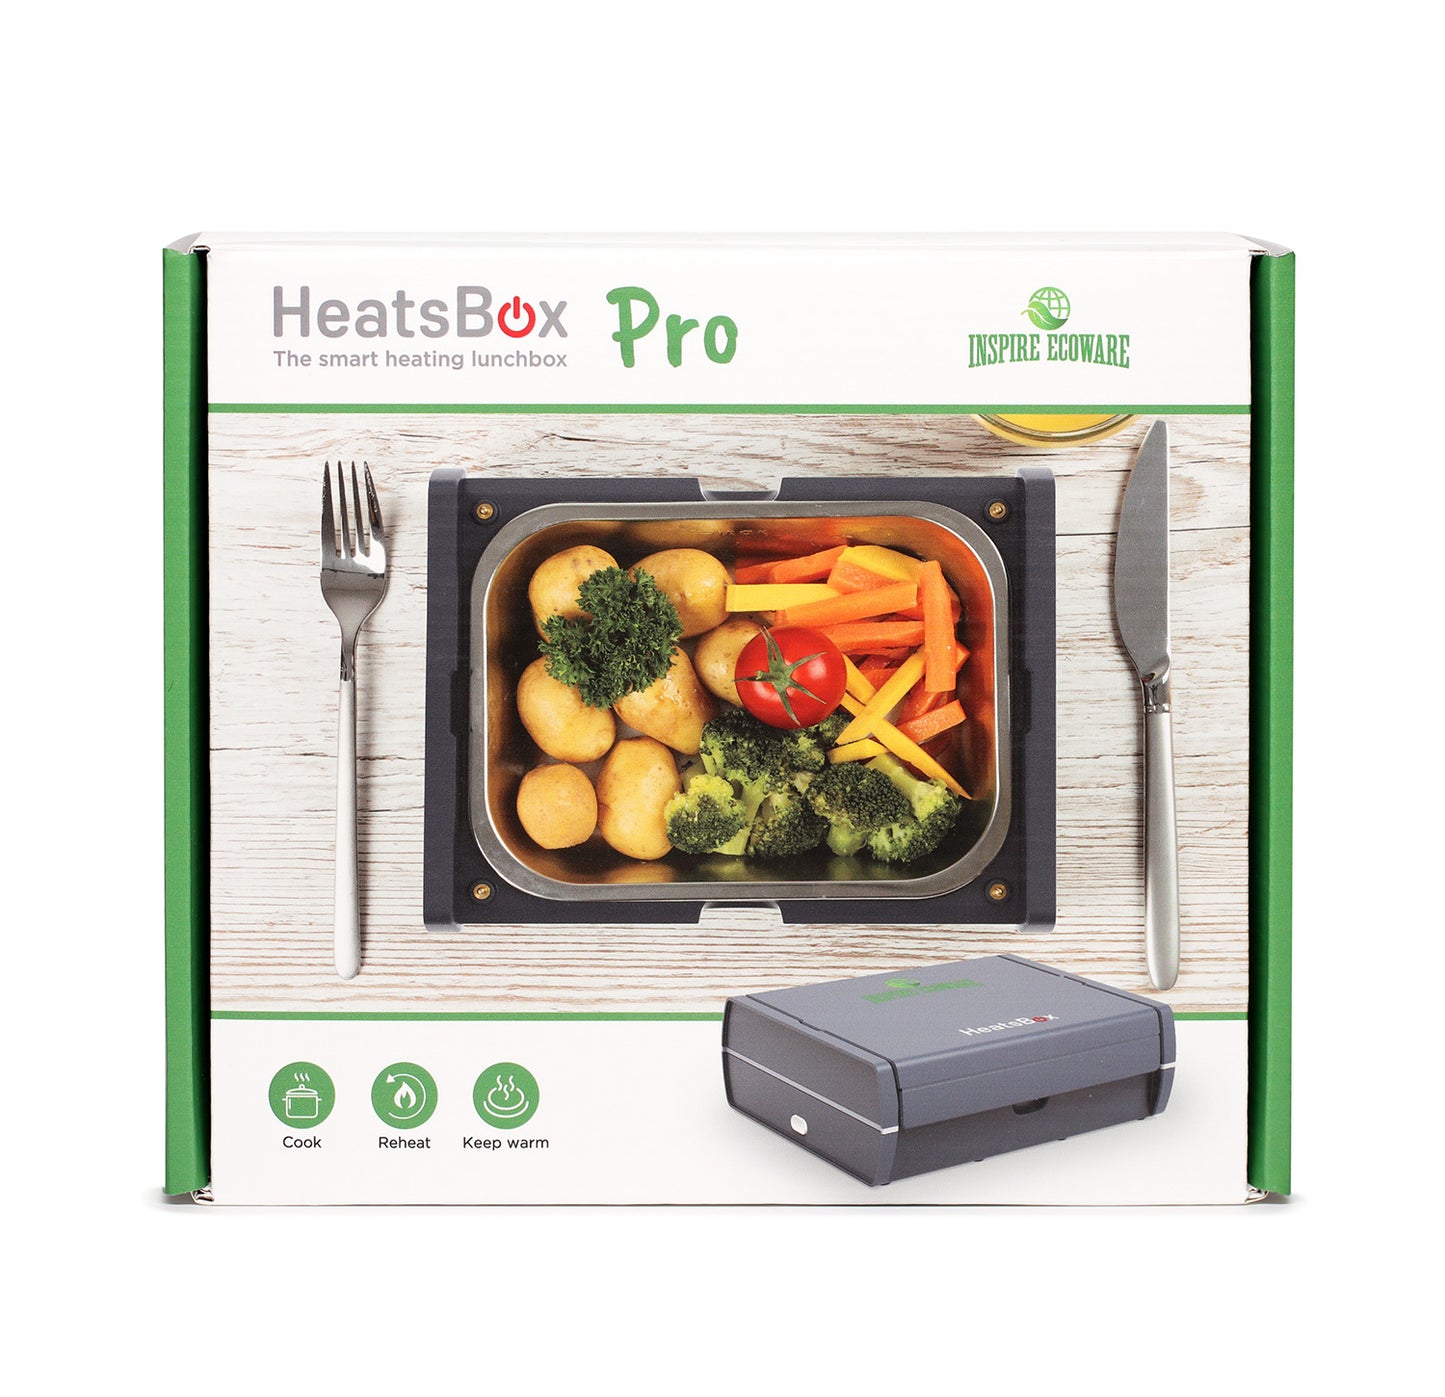 HeatsBox Go - Detailed Review (Built-in Battery, Smart Warming Lunch Box)